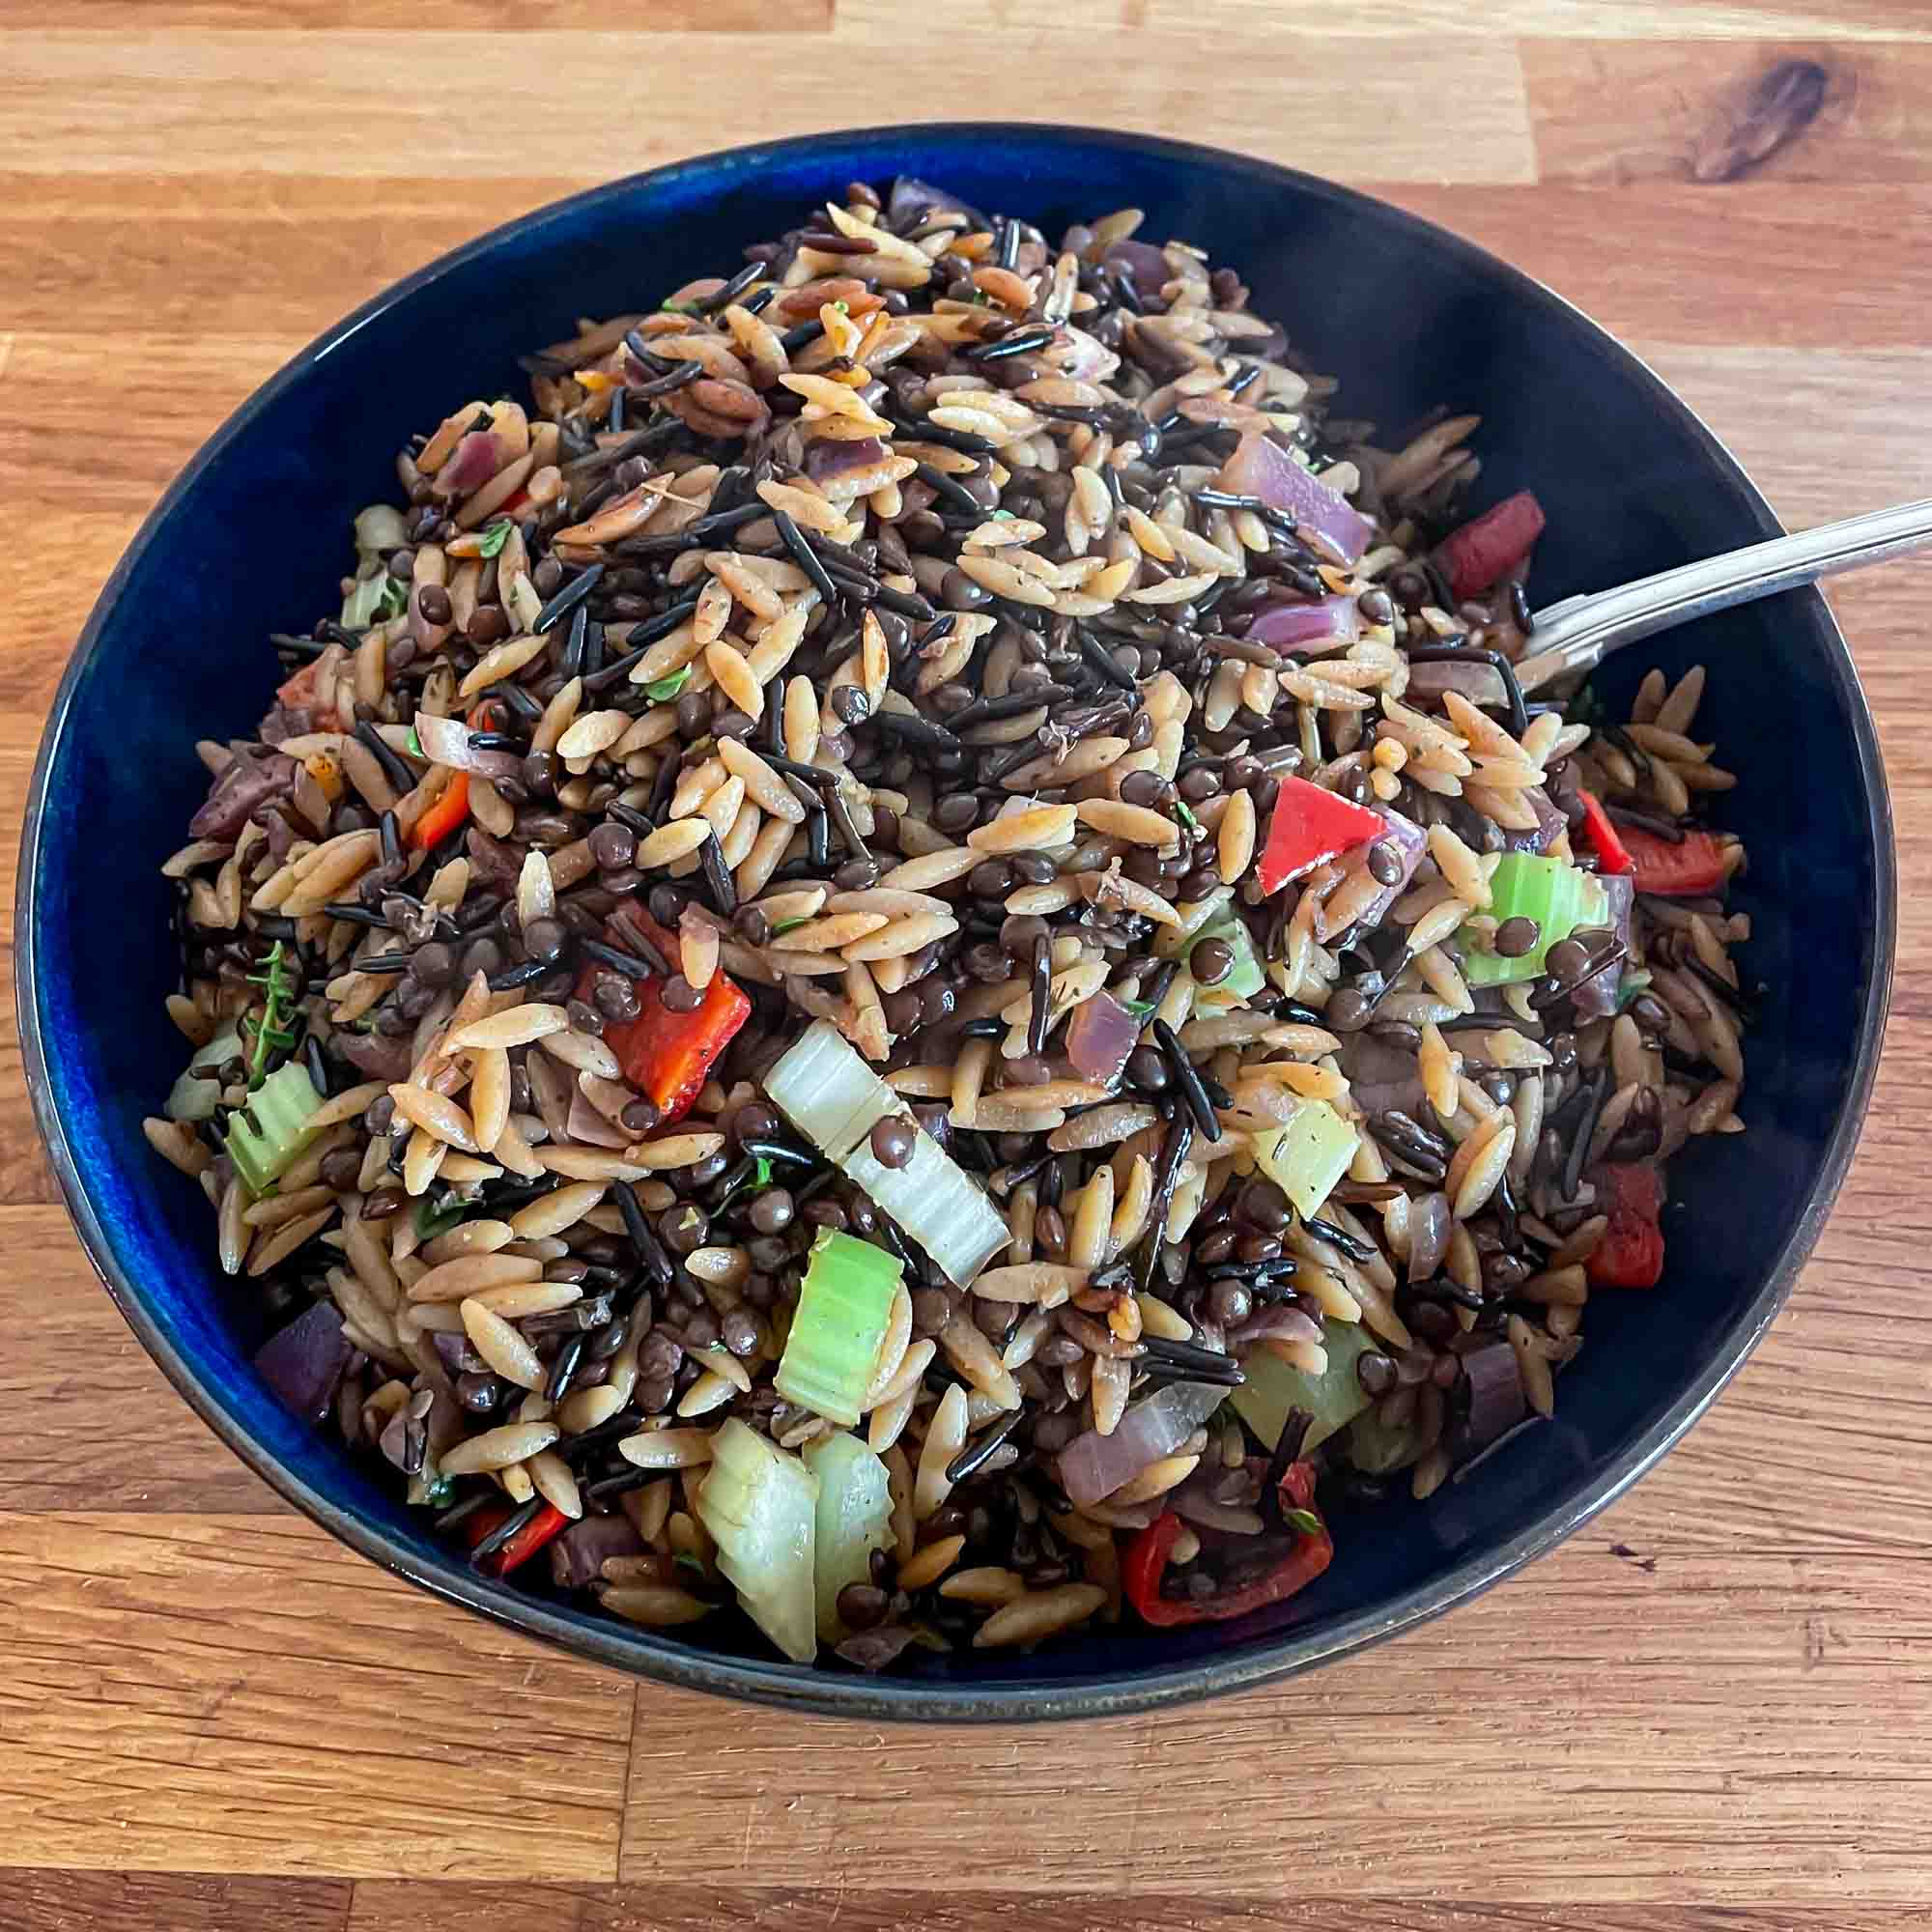 alt="a big bowl of wild rice, lentils and orzo with red pepper, purple onions, and green celery."